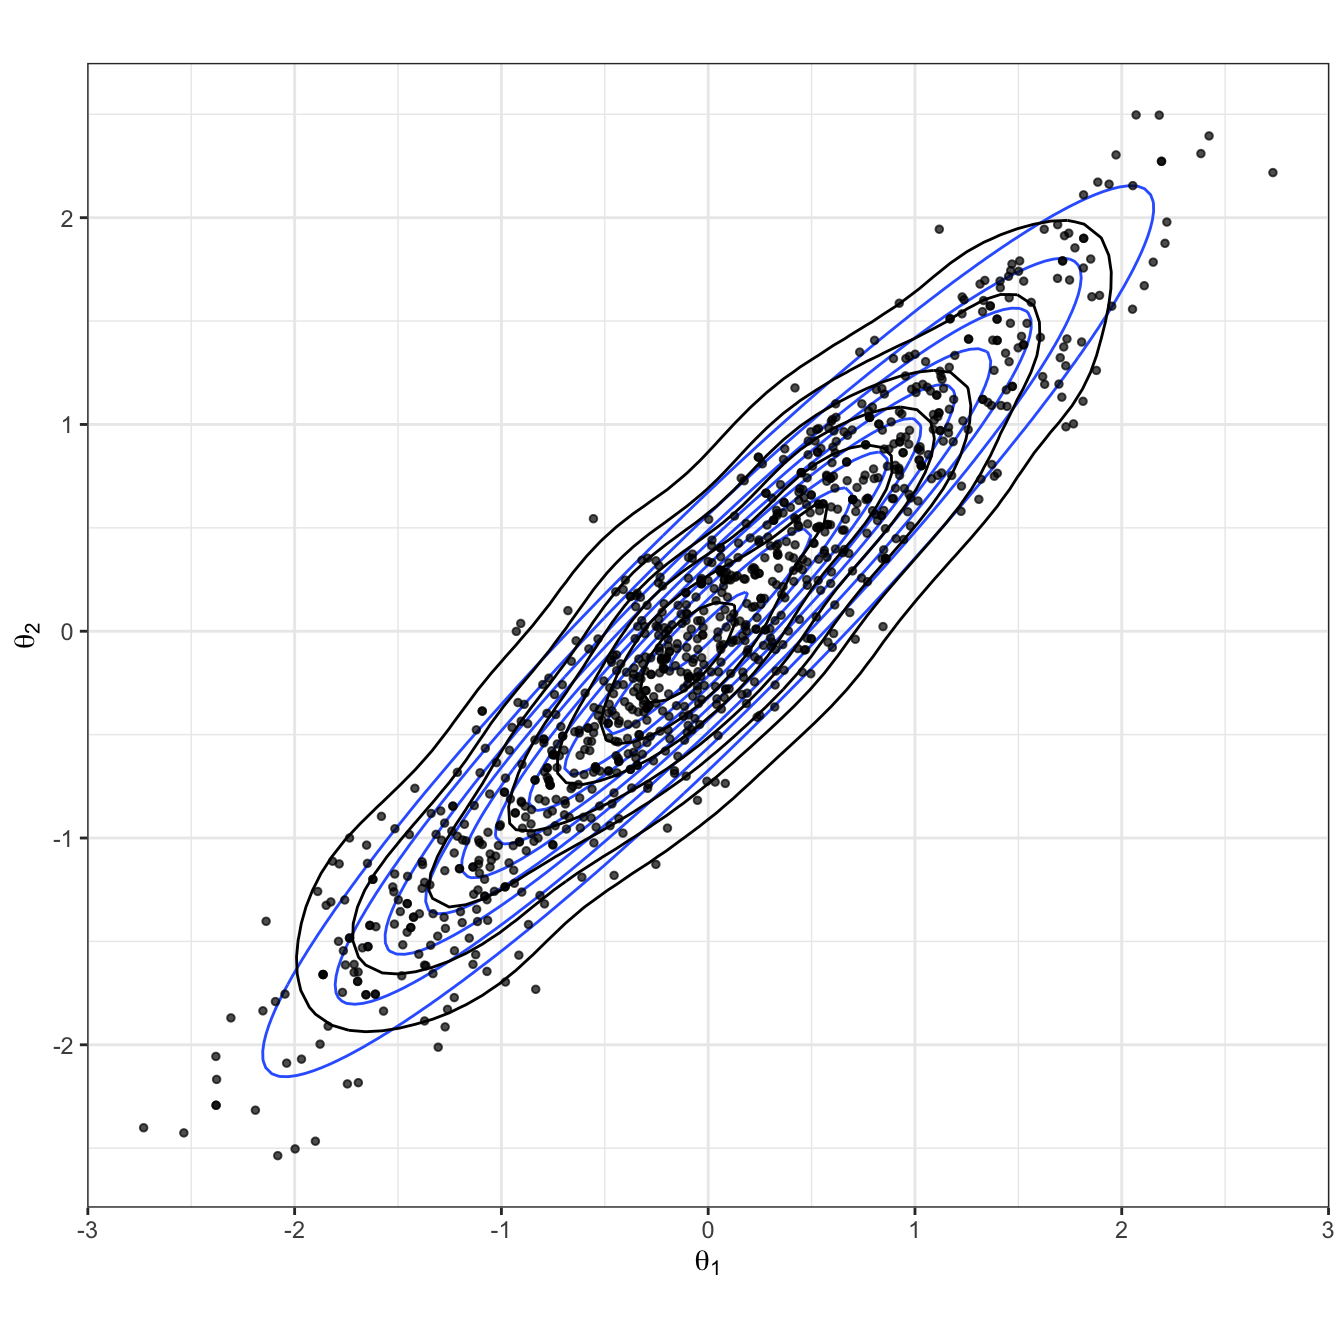 Bivariate Gaussian sampled using a HMC algorithm. The true Gaussian density is shown in blue, and overlaid in black with both the samples and estimated density.